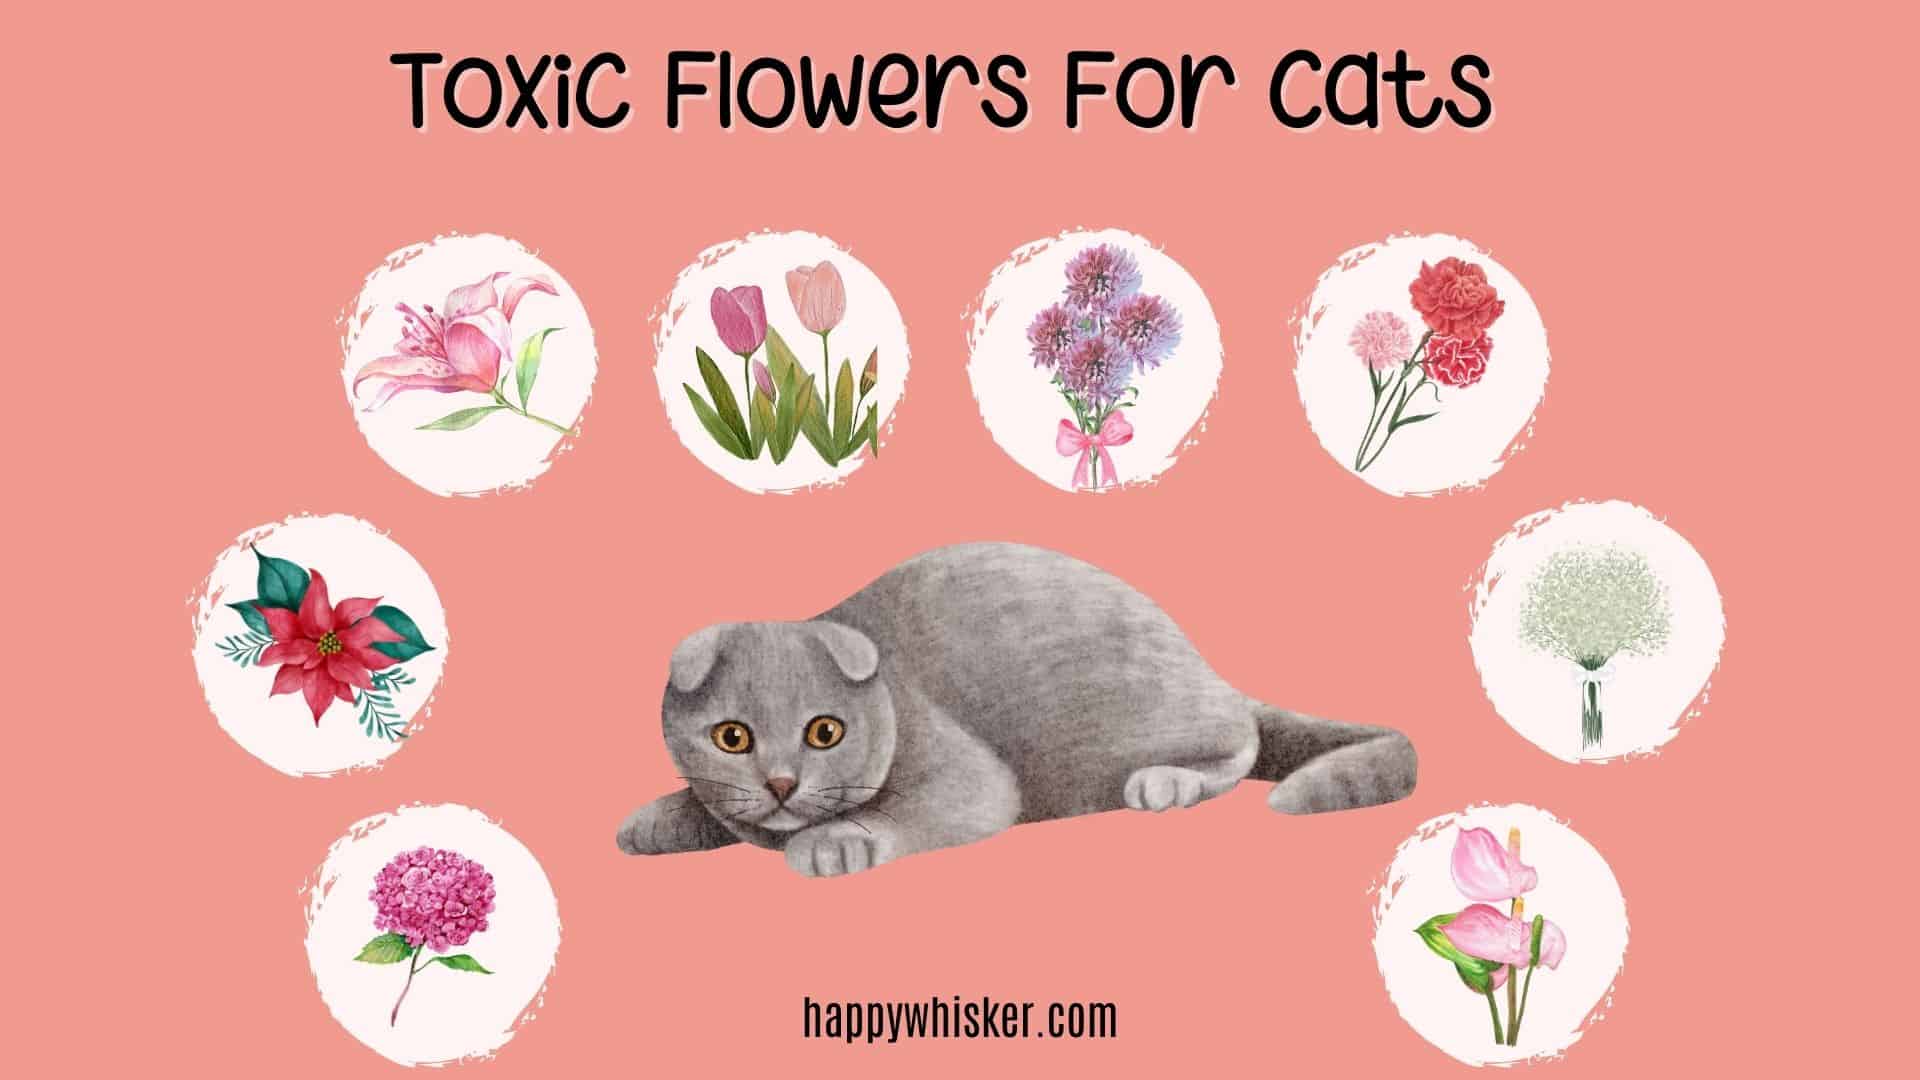 illustration of a cat surrounded by toxic flowers